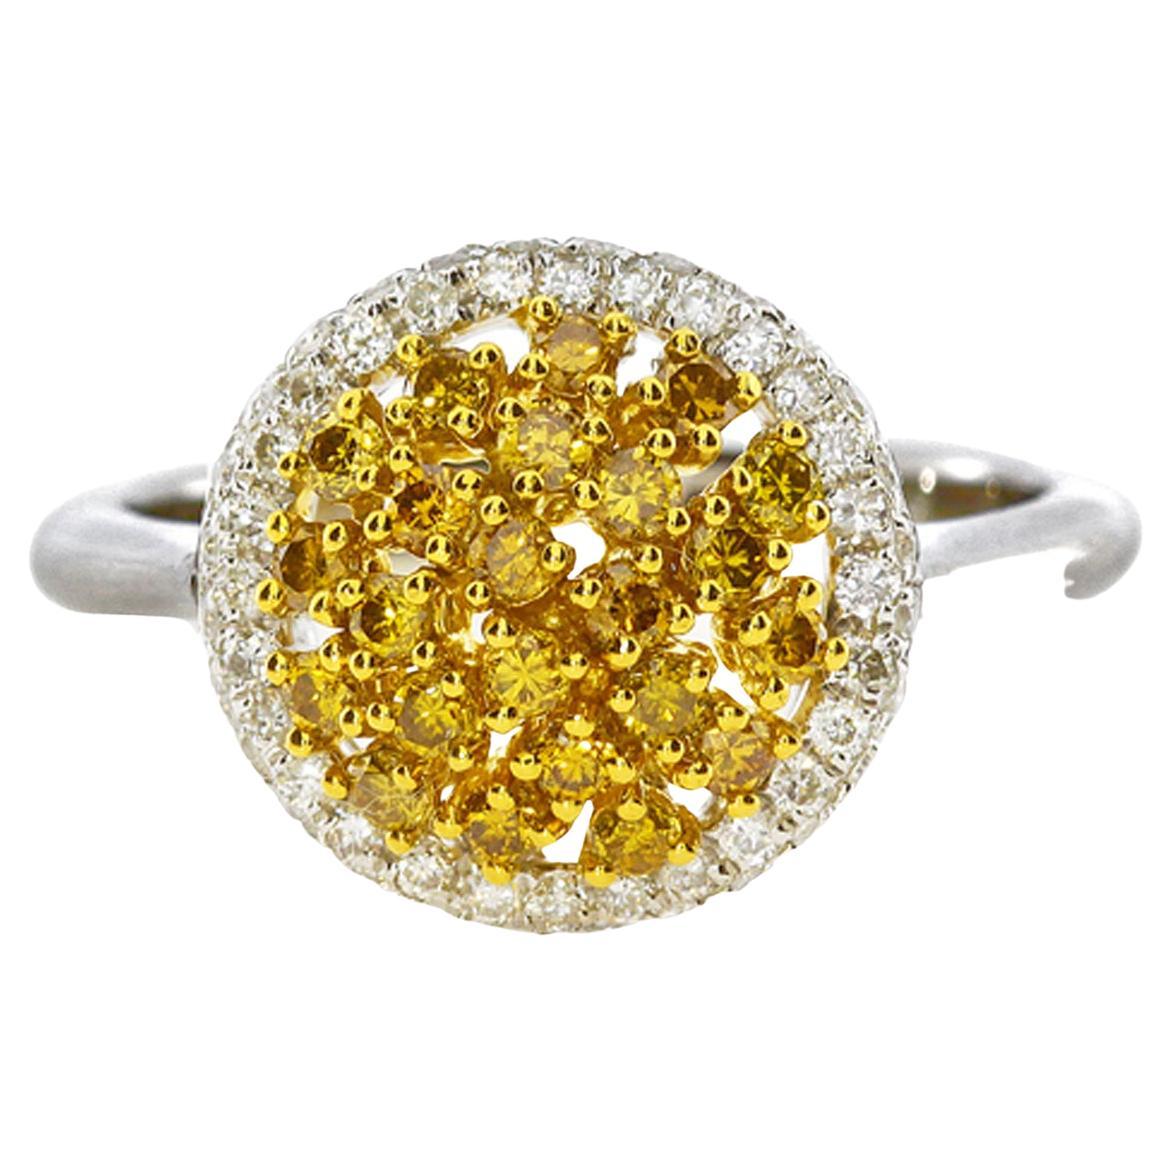 0.66 Carat Natural Fancy Intense Yellow Diamond Cluster Ring For Sale